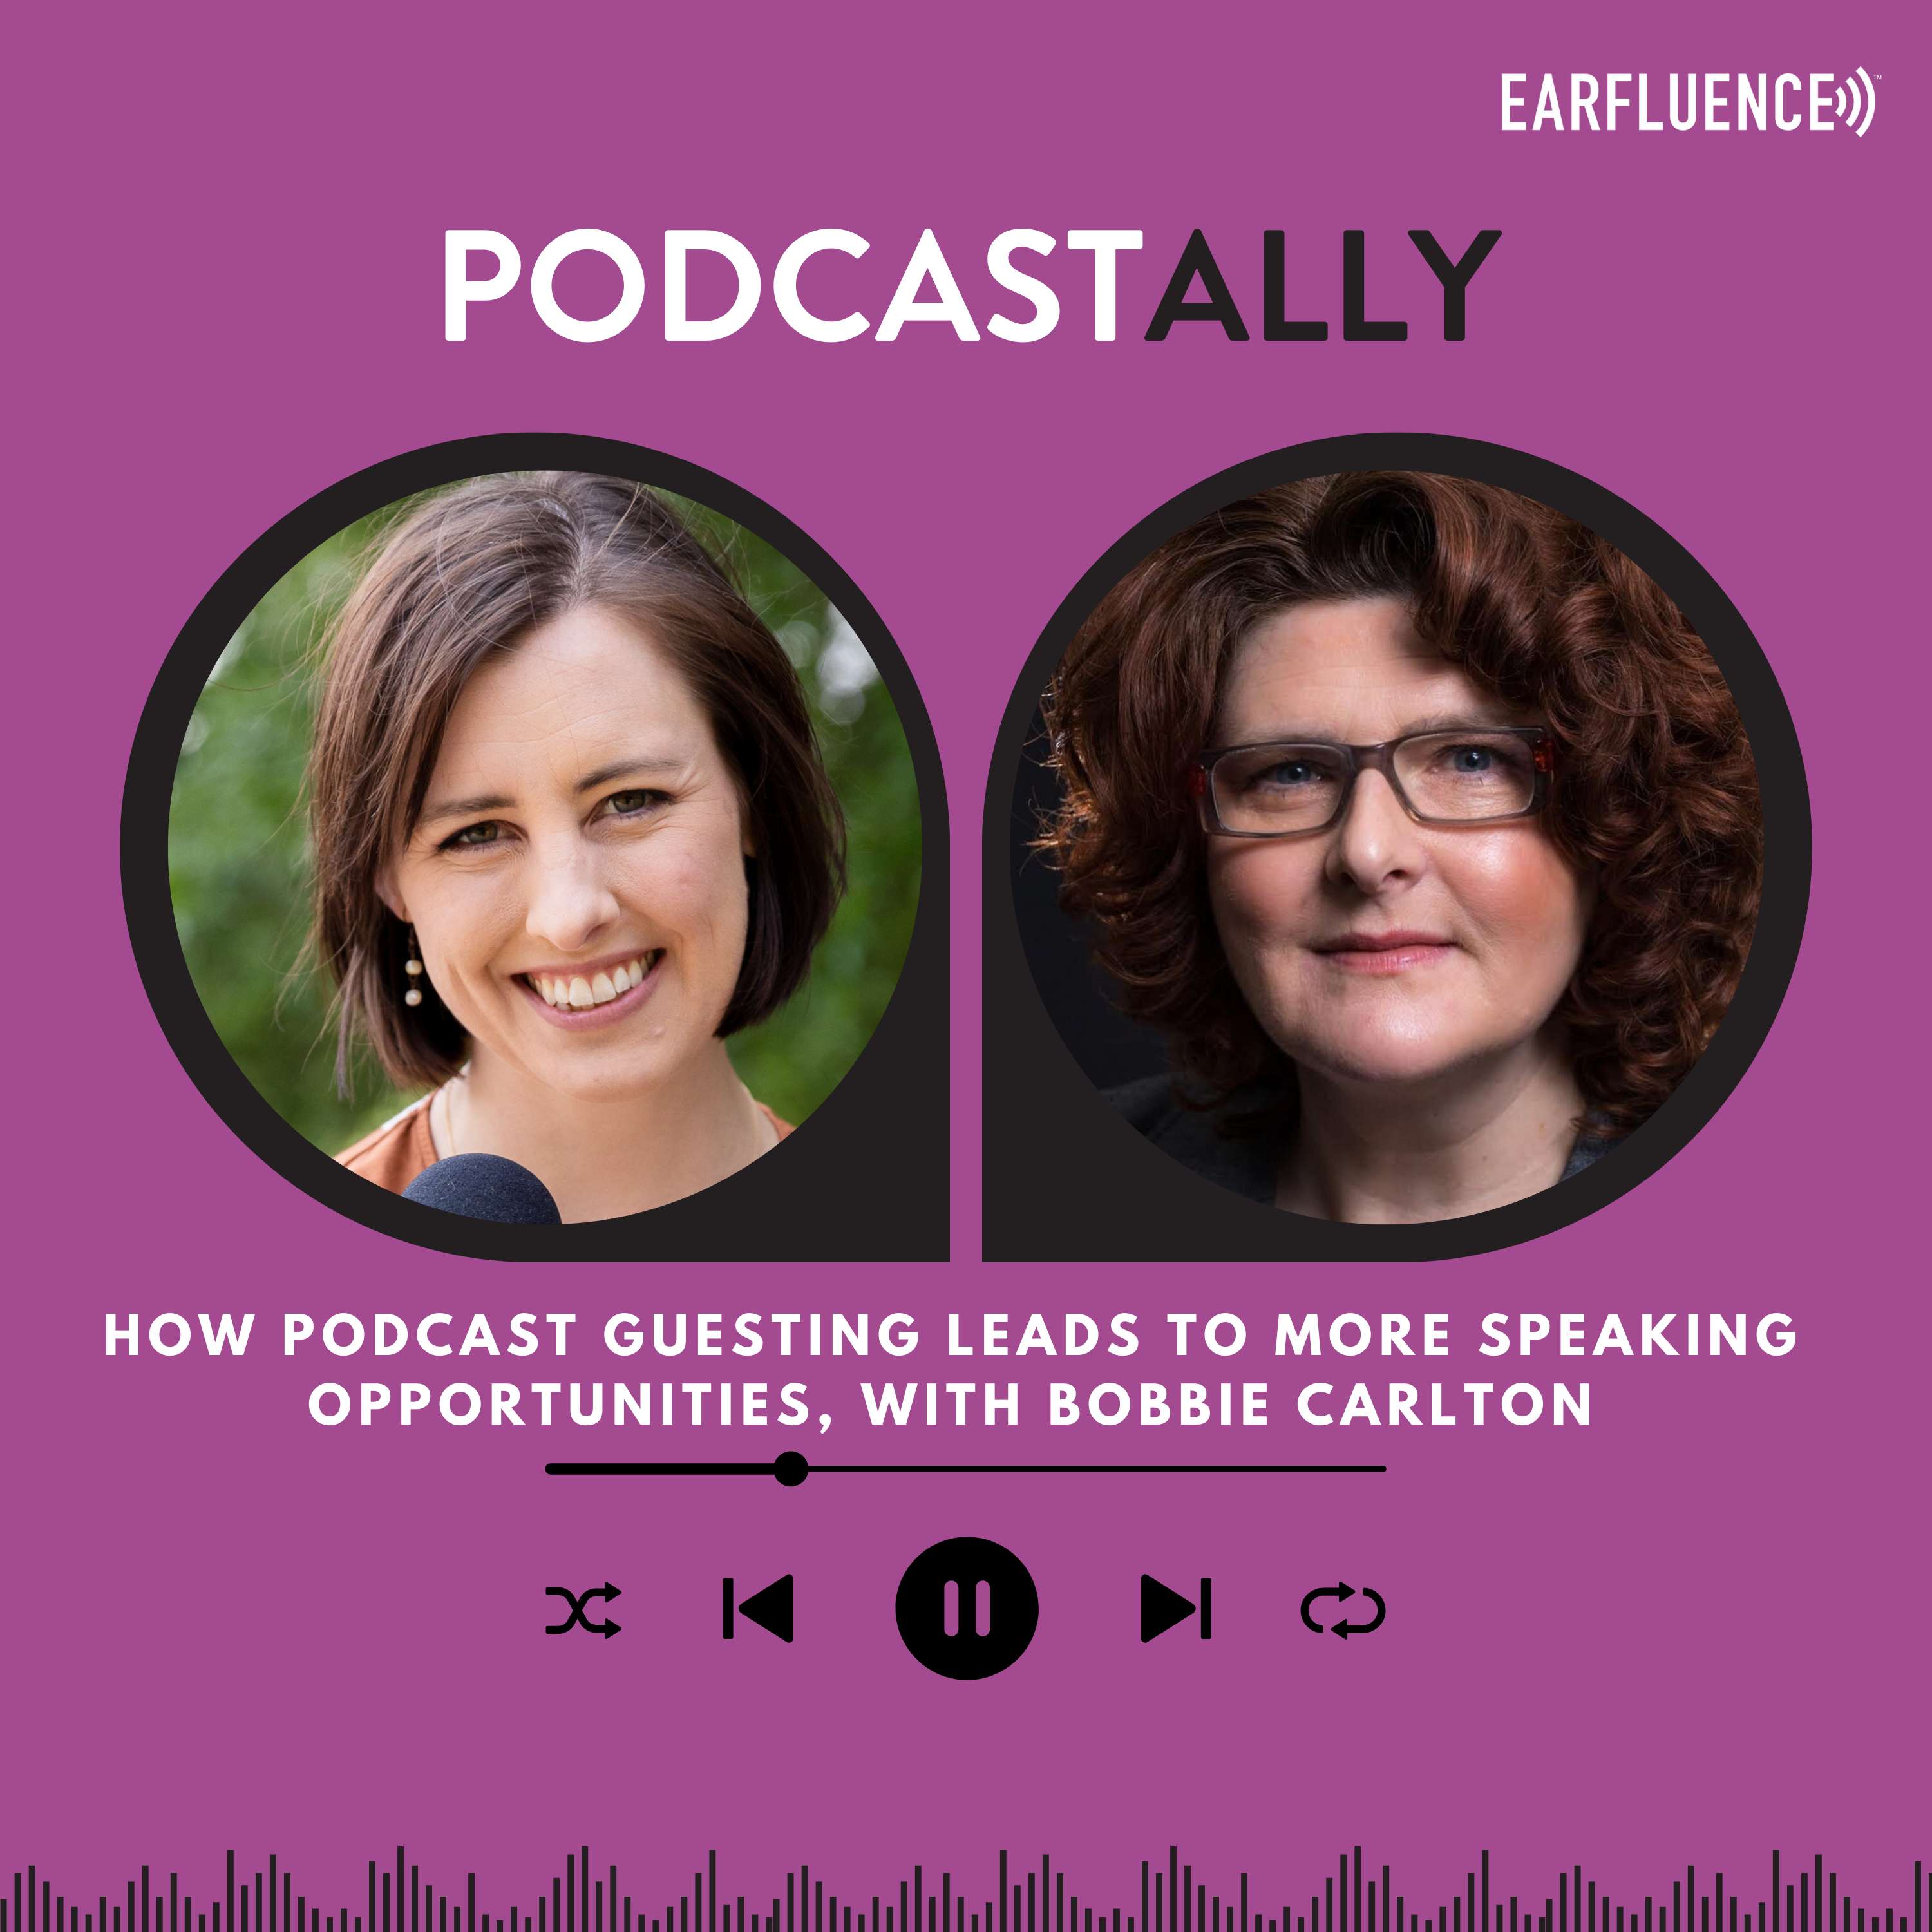 How Podcast Guesting Leads to More Speaking Opportunities, with Bobbie Carlton